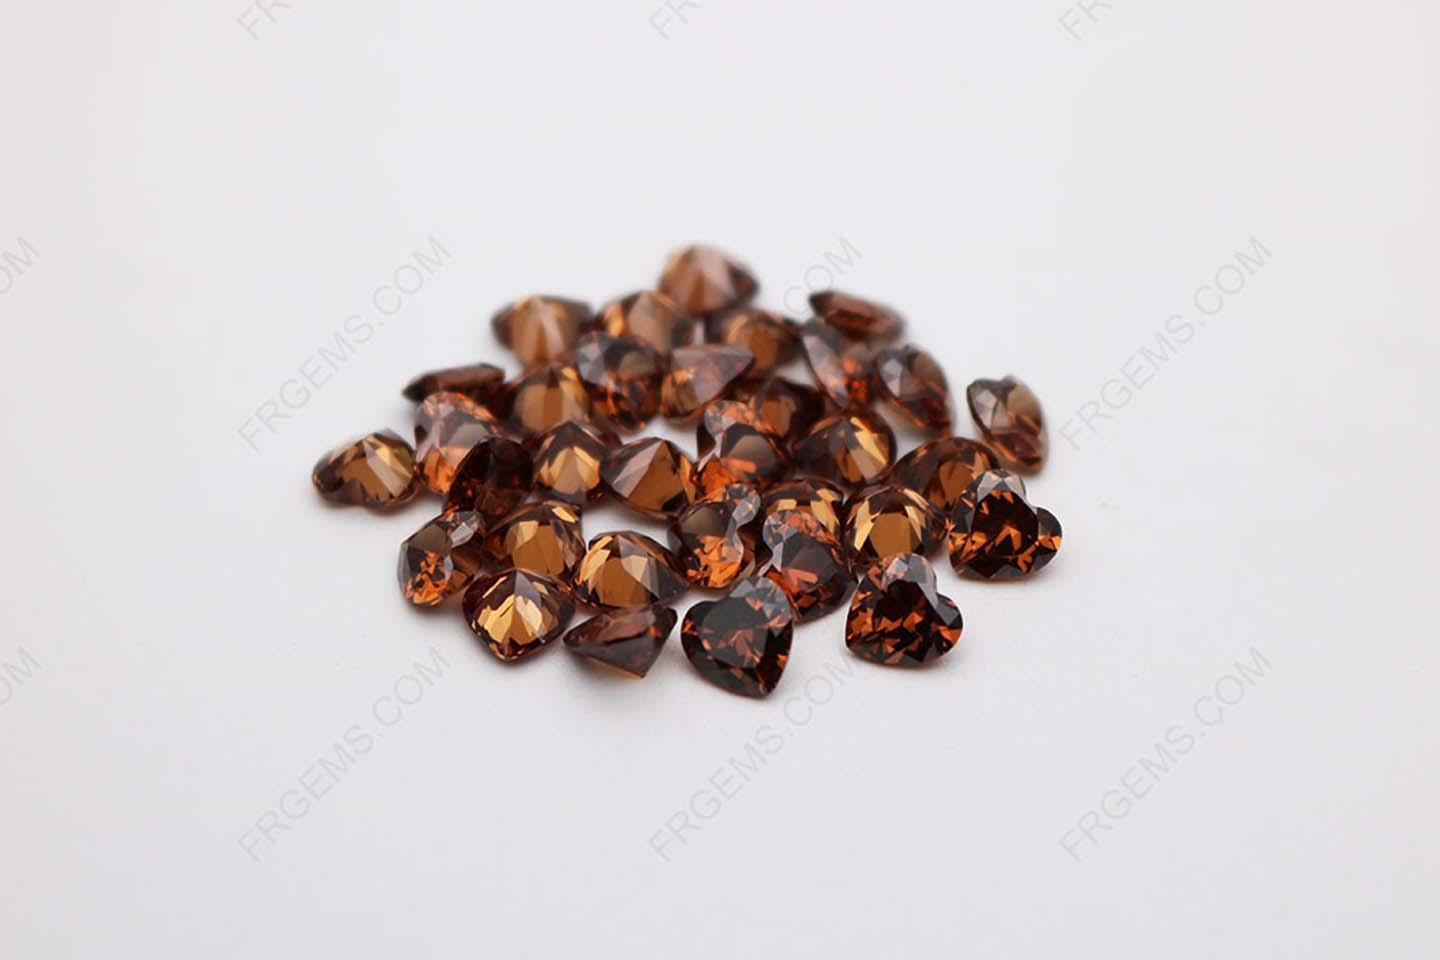 Cubic Zirconia Coffee Brown Heart Shape faceted 6x6mm stones CZ47 IMG_1210